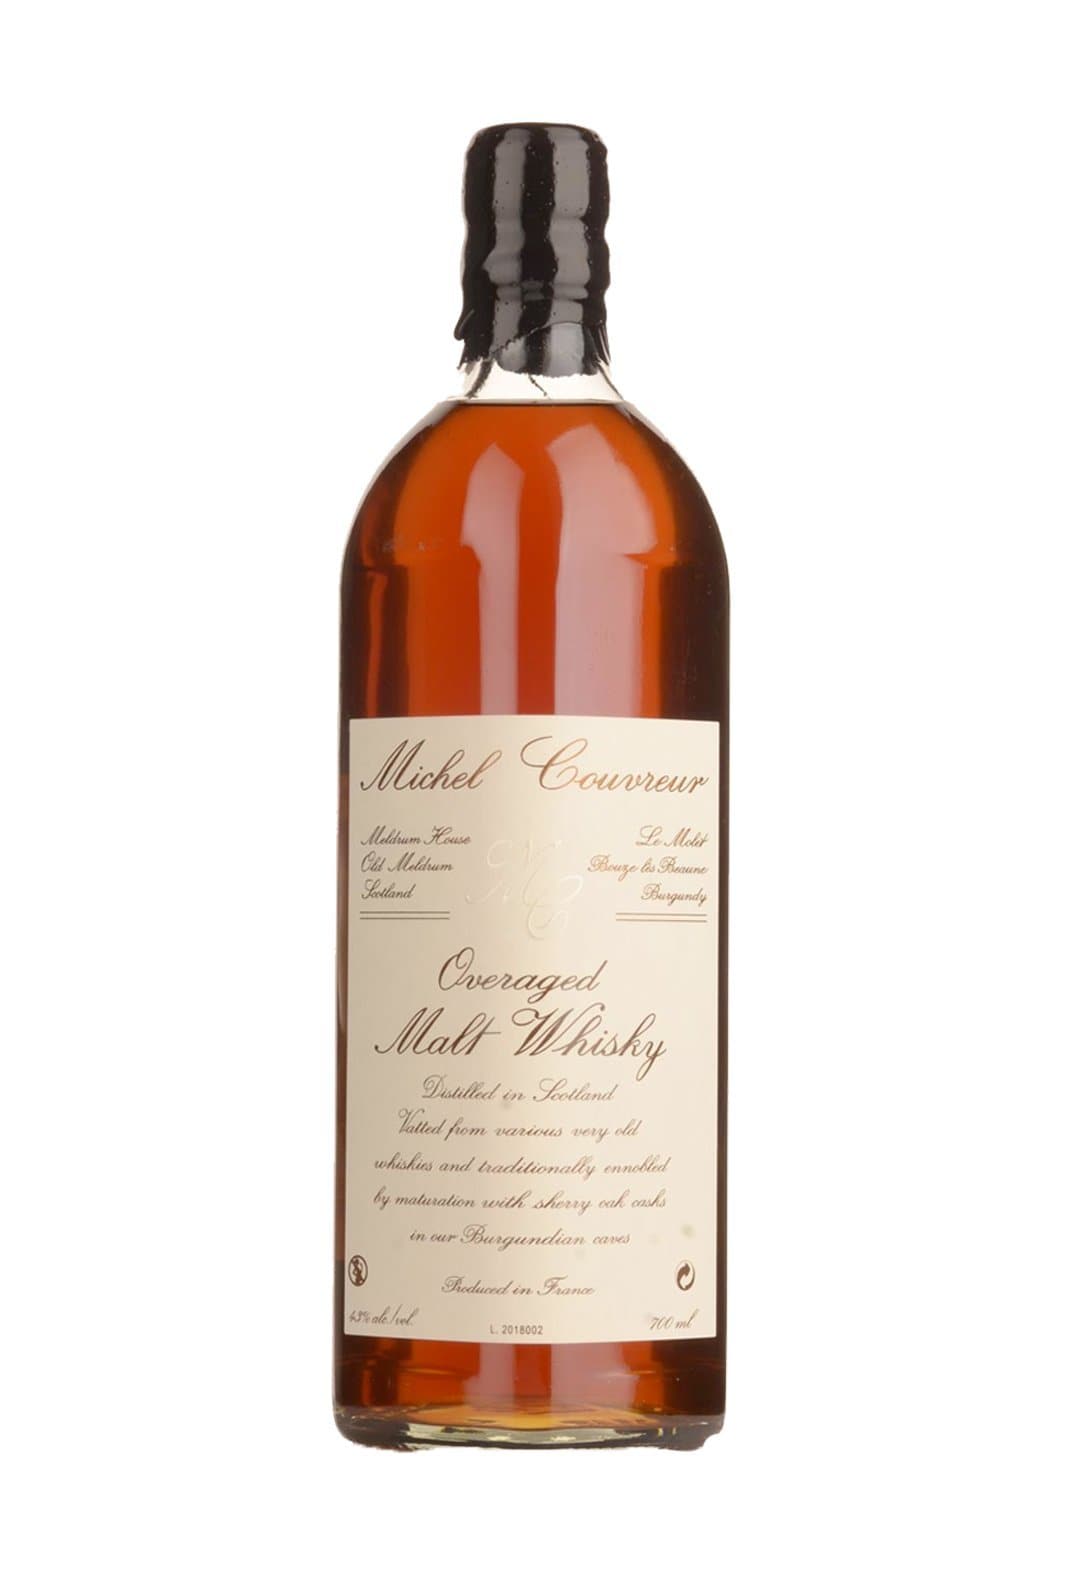 Michel Couvreur Whisky Overaged 43% 700ml | Whiskey | Shop online at Spirits of France